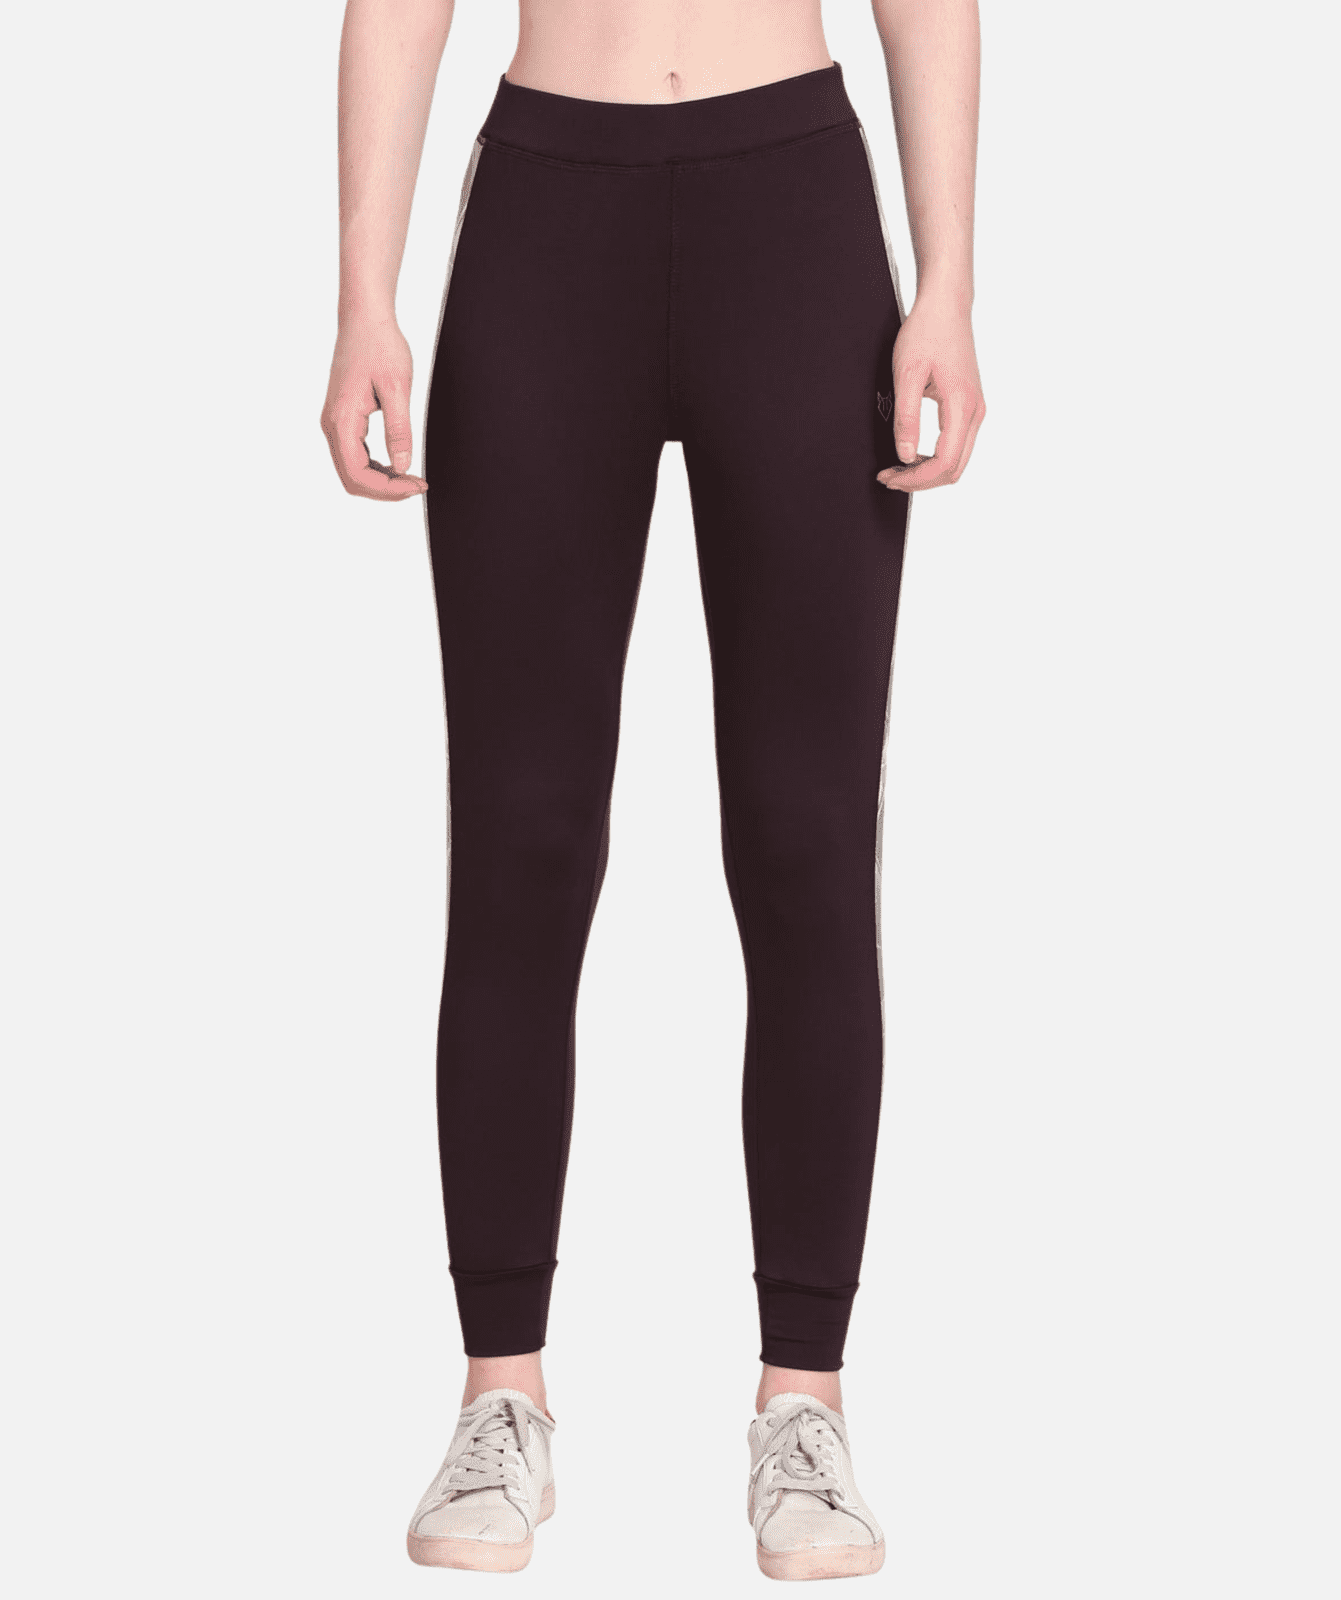 Classic Joggers for Women | Comfort Fit | Reflective Strip Women's Lower